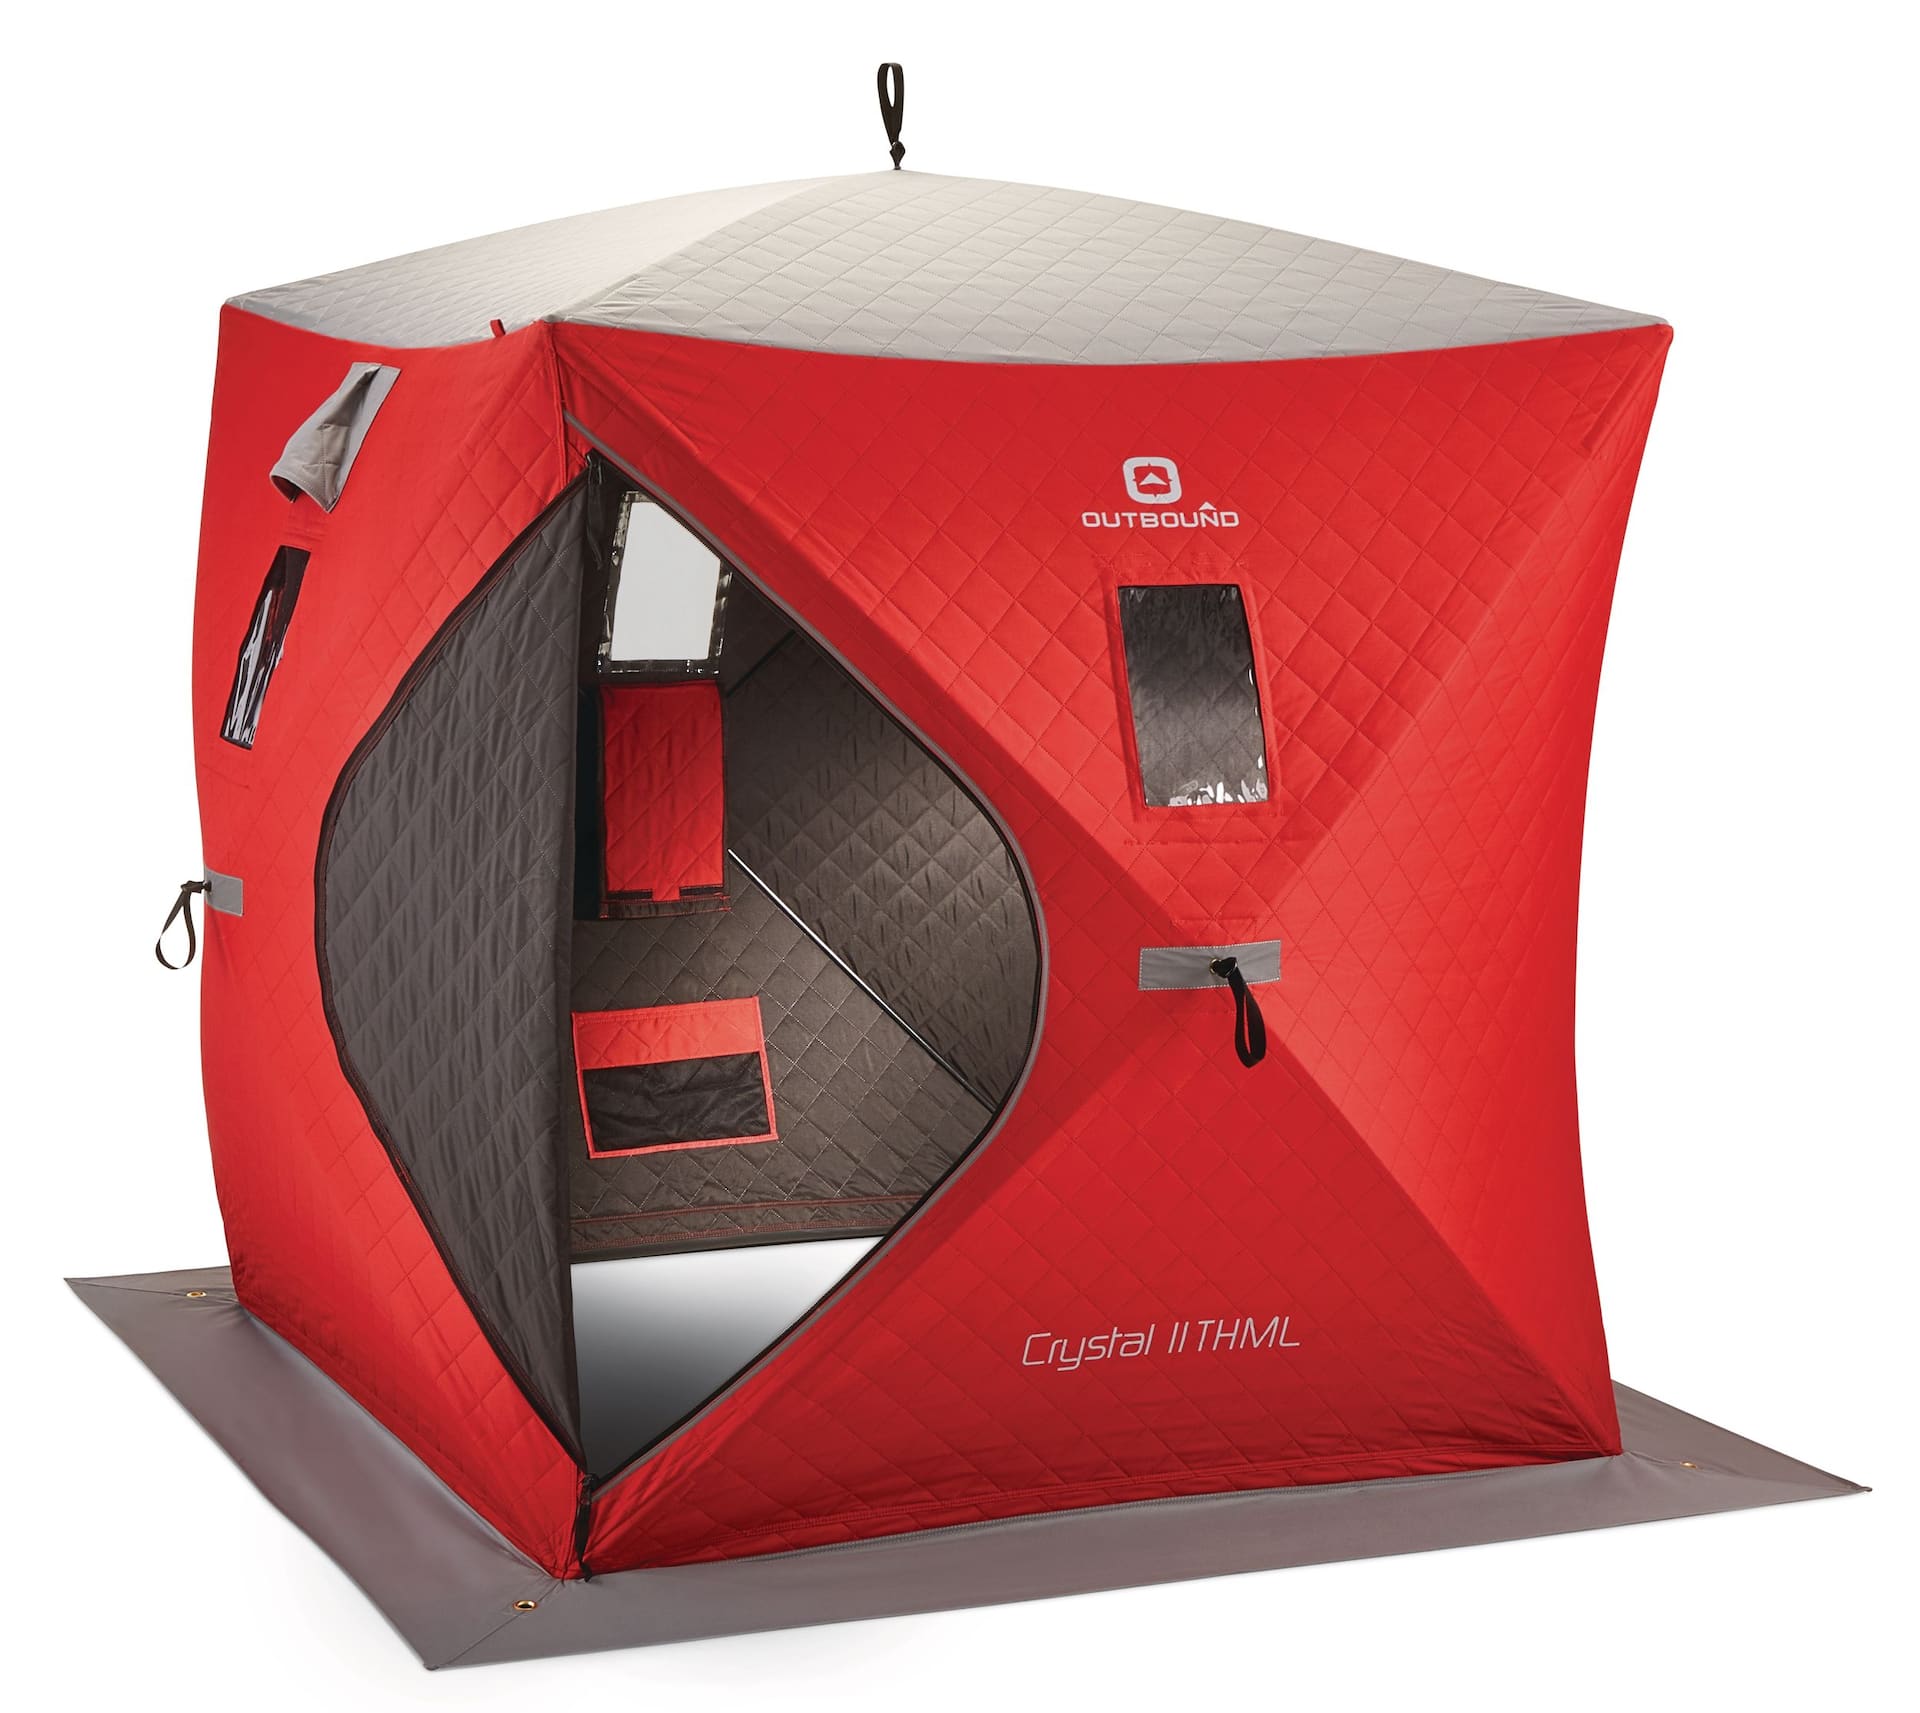 https://media-www.canadiantire.ca/product/playing/fishing/ice-fishing/0771869/outbound-ice-crystal-2-ice-shelter-insulated-f703968a-05f1-4a10-8394-a53488684069-jpgrendition.jpg